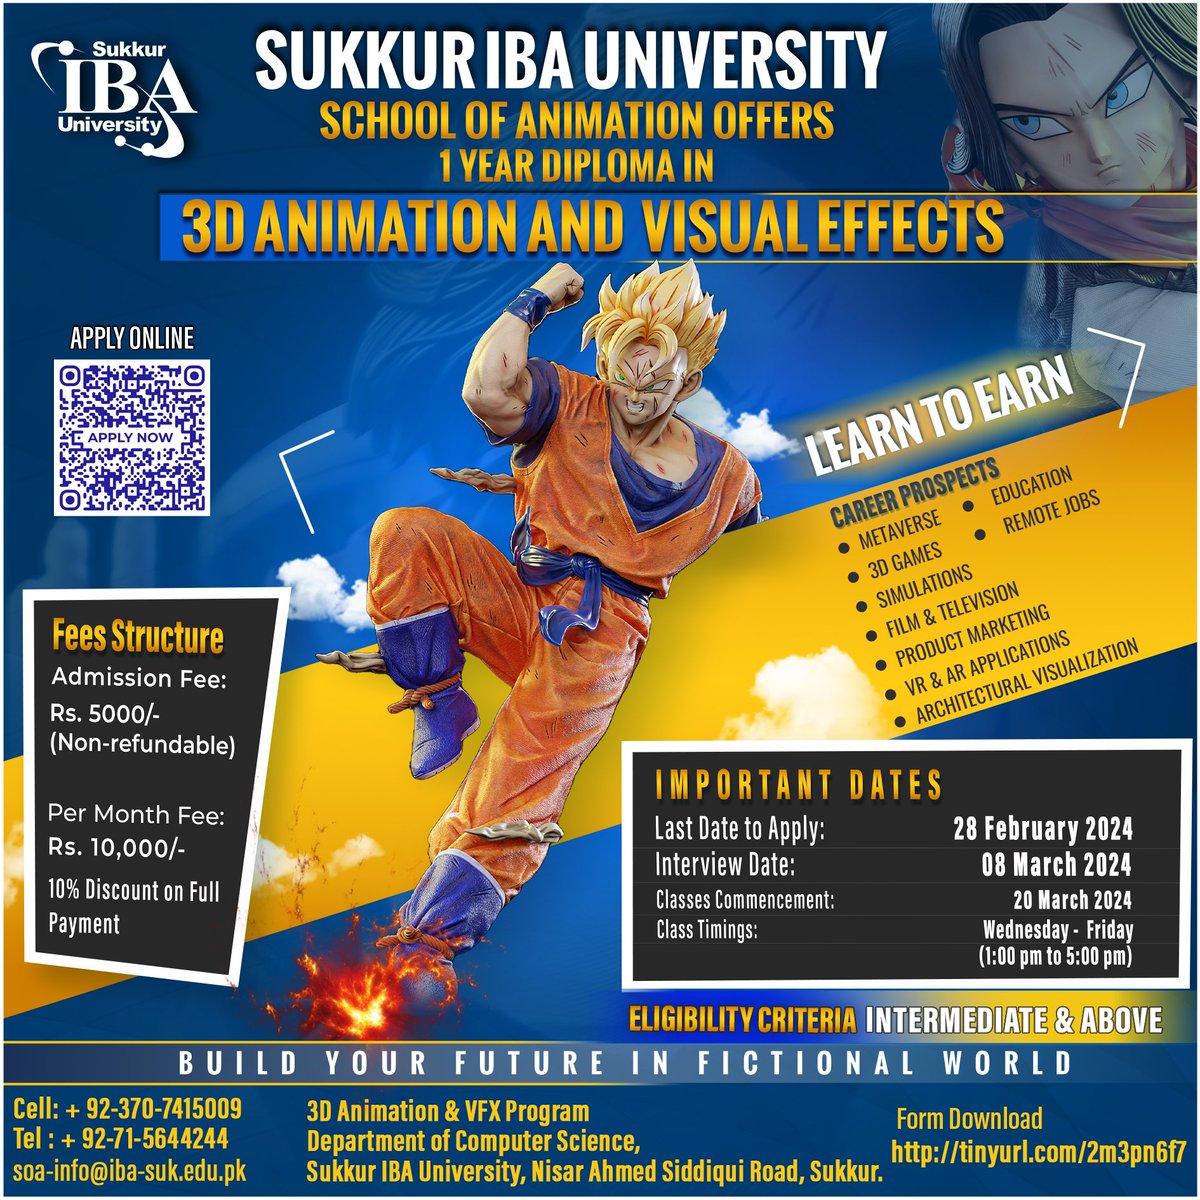 Sukkur IBA University announces Admission for One Year Diploma in '3D Animation and Visual Effects' program. Eligibility: Intermediate and above Last Date to Apply: February 28, 2024 Interviews: March 08, 2024 Classes: March 20, 2024 Apply online: tinyurl.com/2m3pn6f7